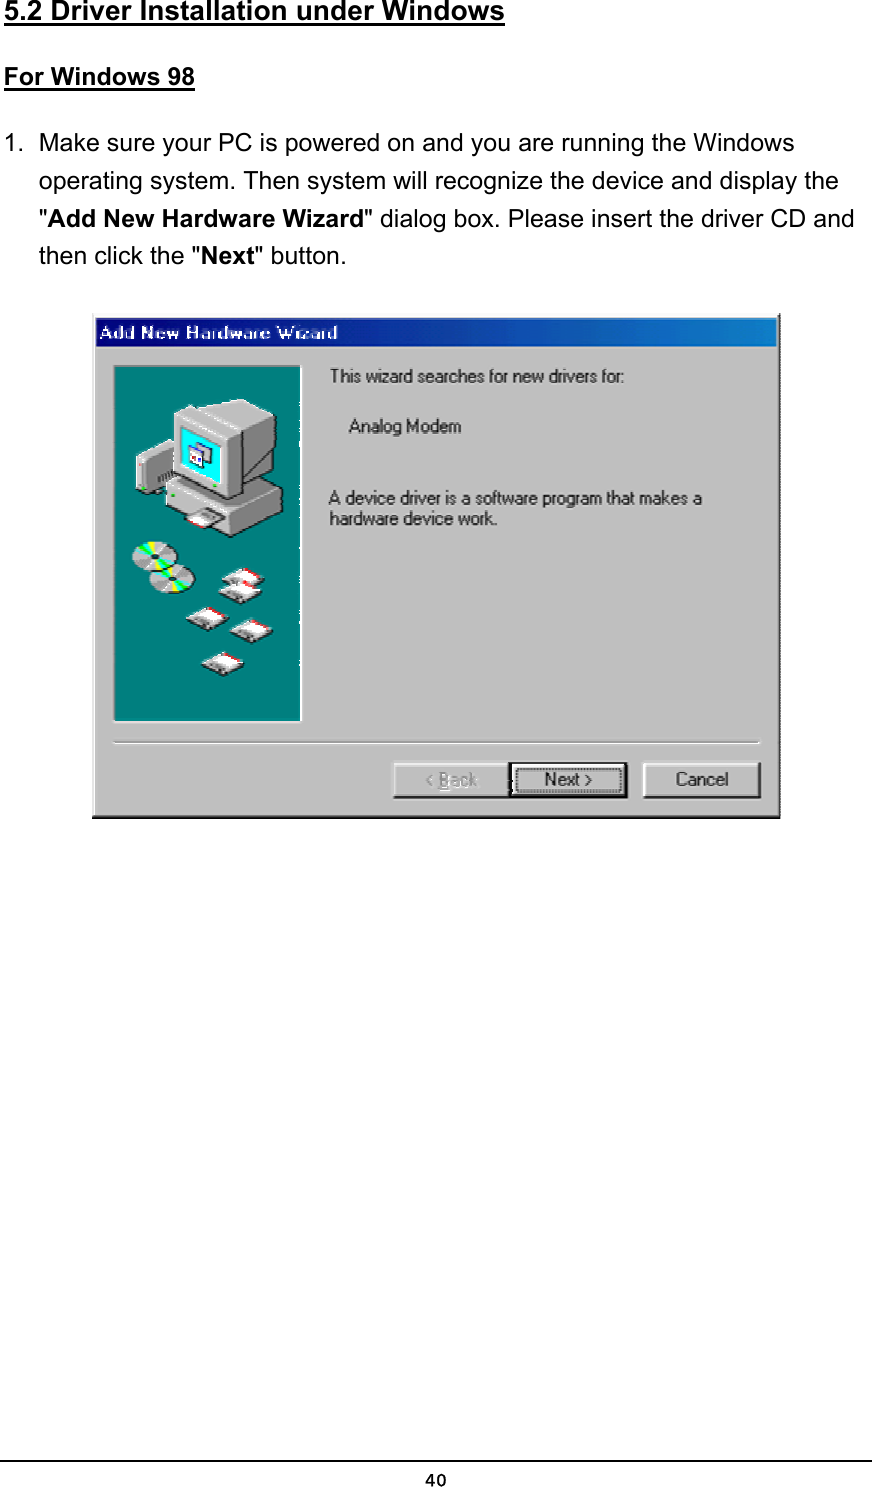   405.2 Driver Installation under Windows For Windows 98 1.  Make sure your PC is powered on and you are running the Windows operating system. Then system will recognize the device and display the &quot;Add New Hardware Wizard&quot; dialog box. Please insert the driver CD and then click the &quot;Next&quot; button.  